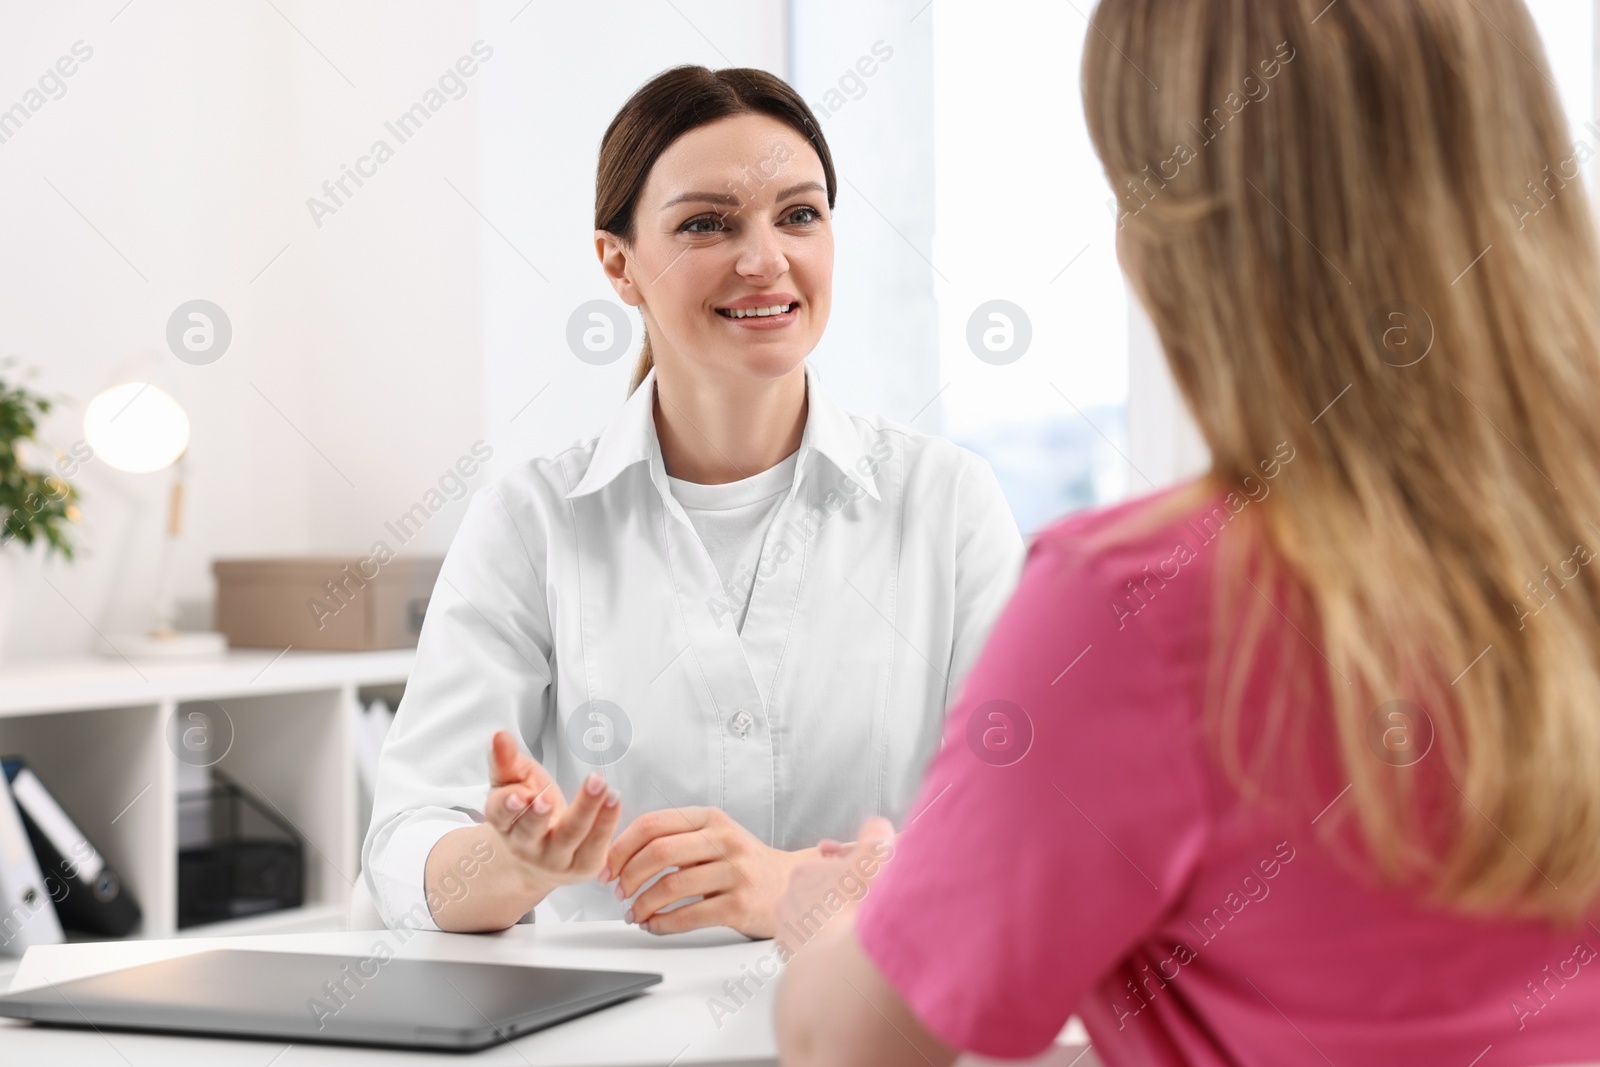 Photo of Mammologist consulting woman during appointment in hospital